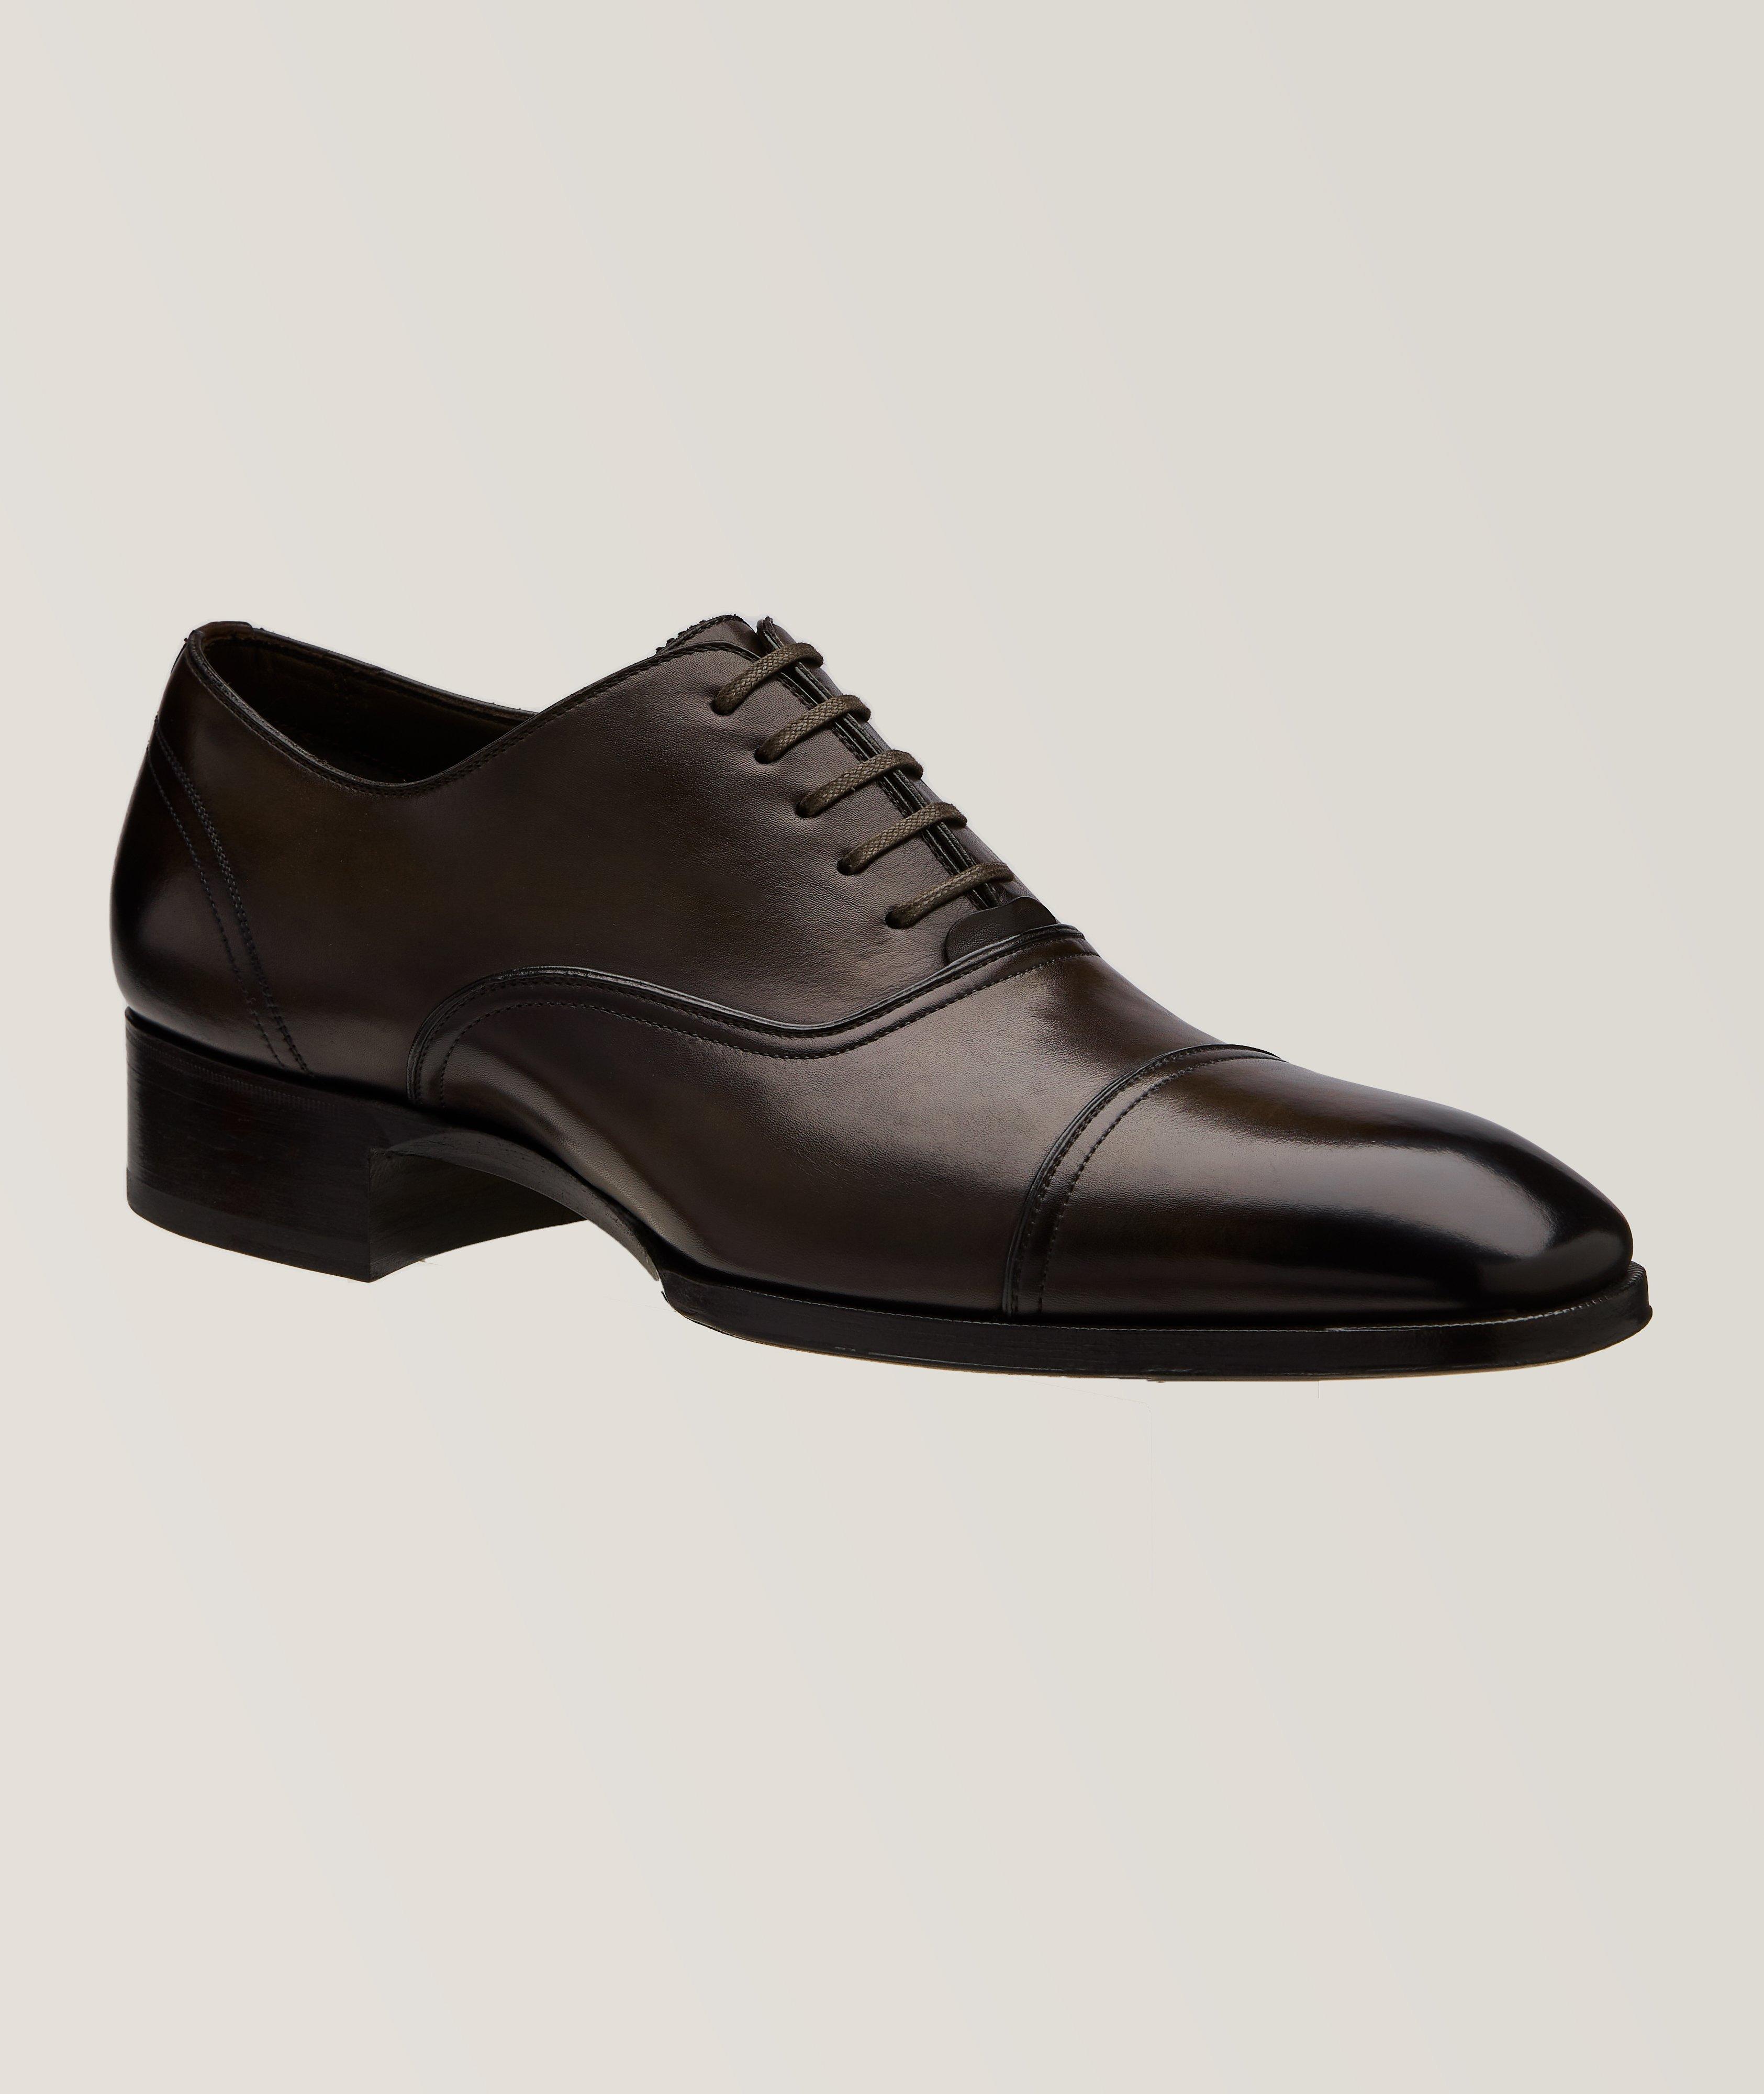 Gianni Leather Oxfords image 0